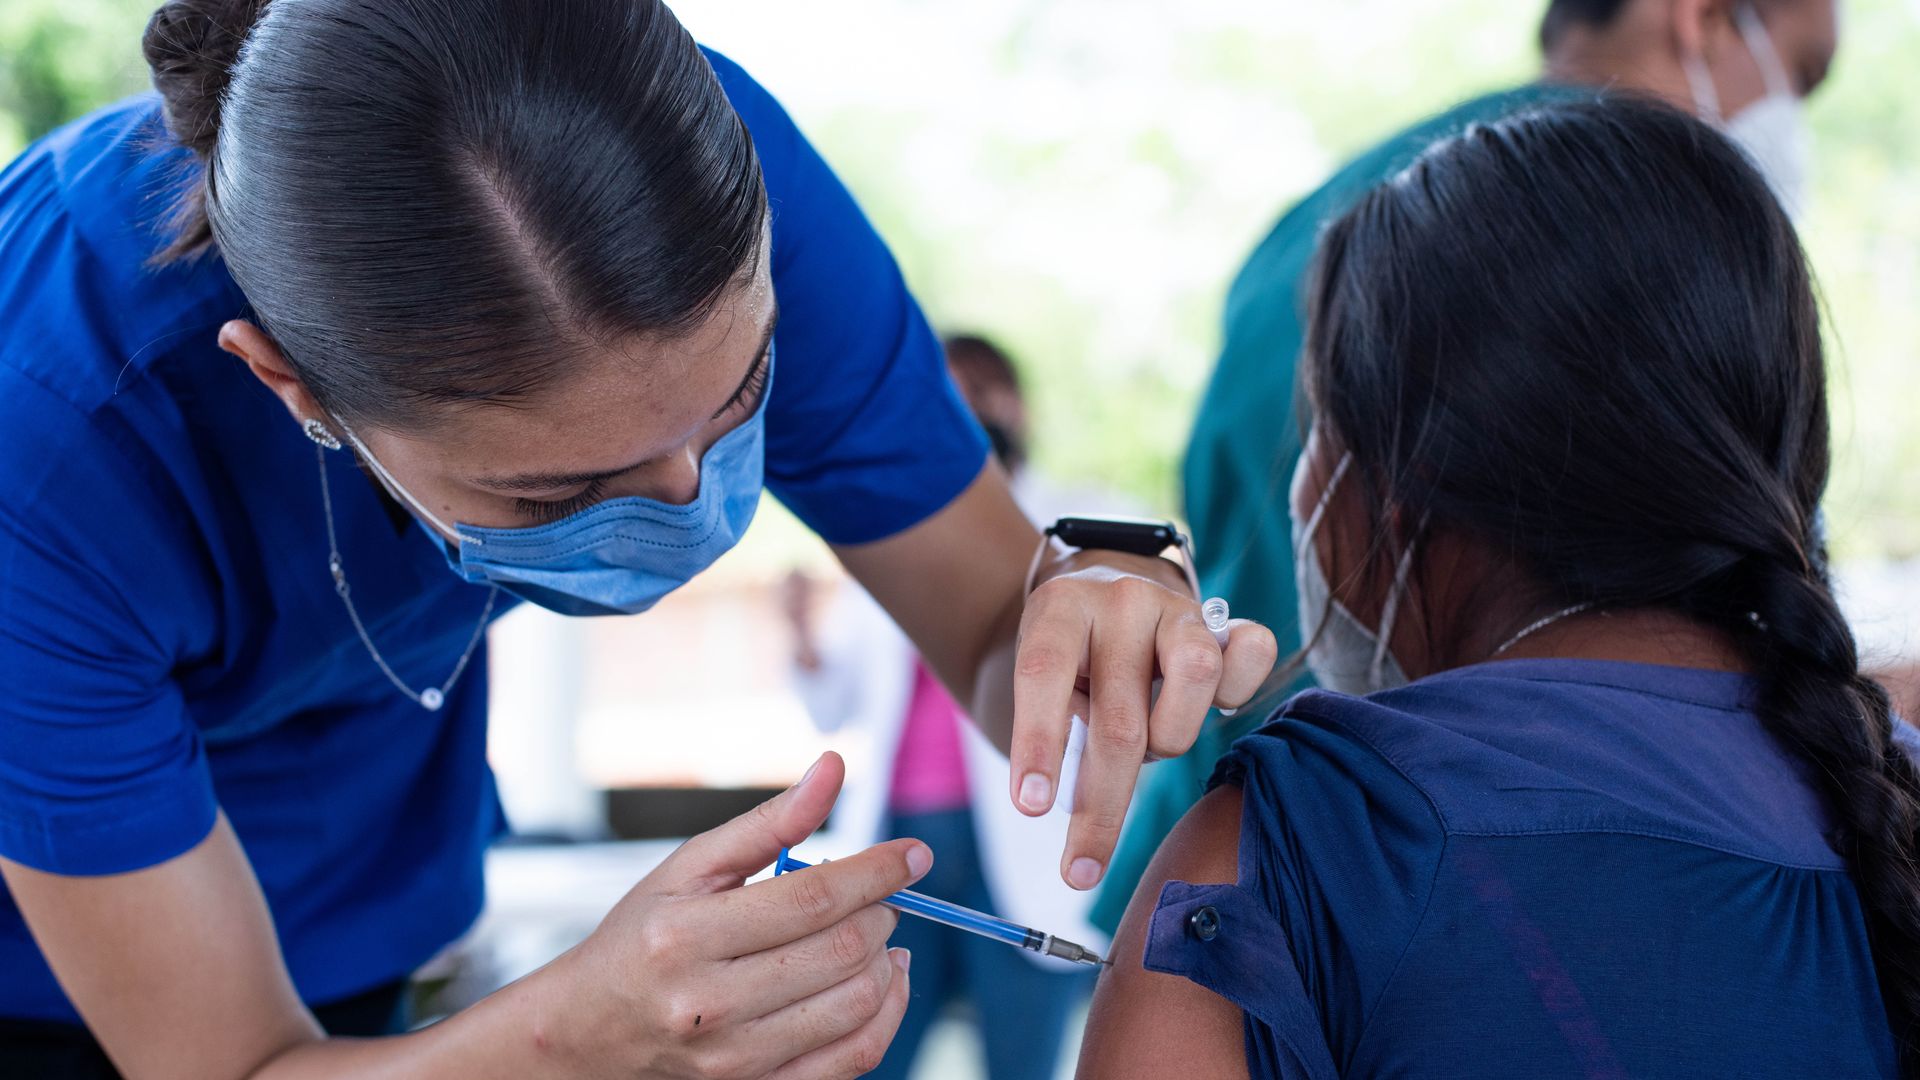 A health worker administers a dose of the AstraZeneca vaccine during a vaccination day on August 4, 2021 in Mexico City, Mexico.